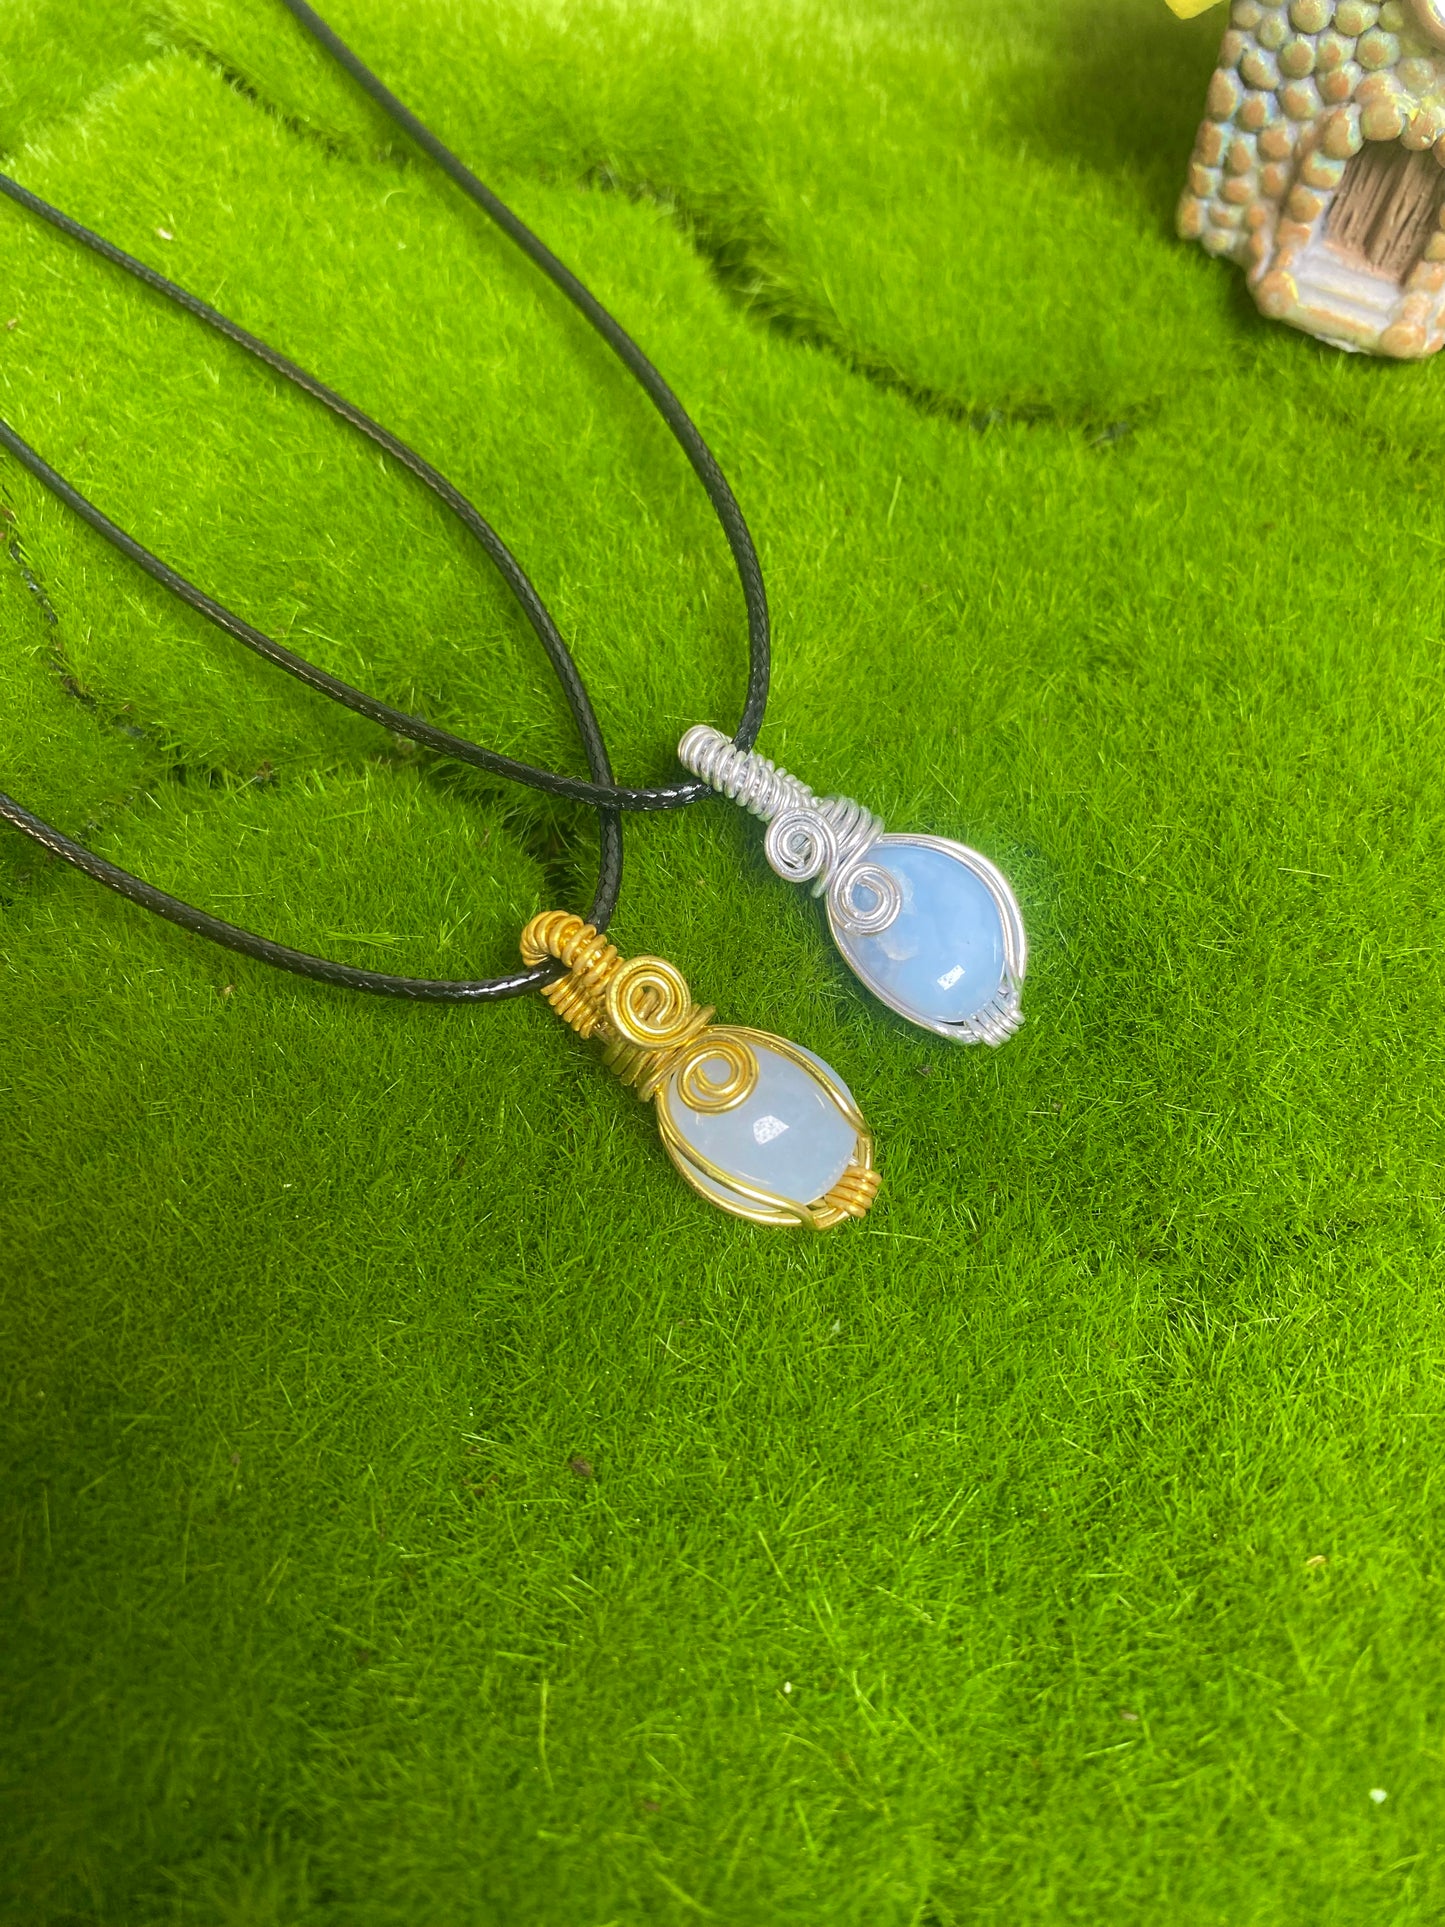 Blue chalcedony necklace